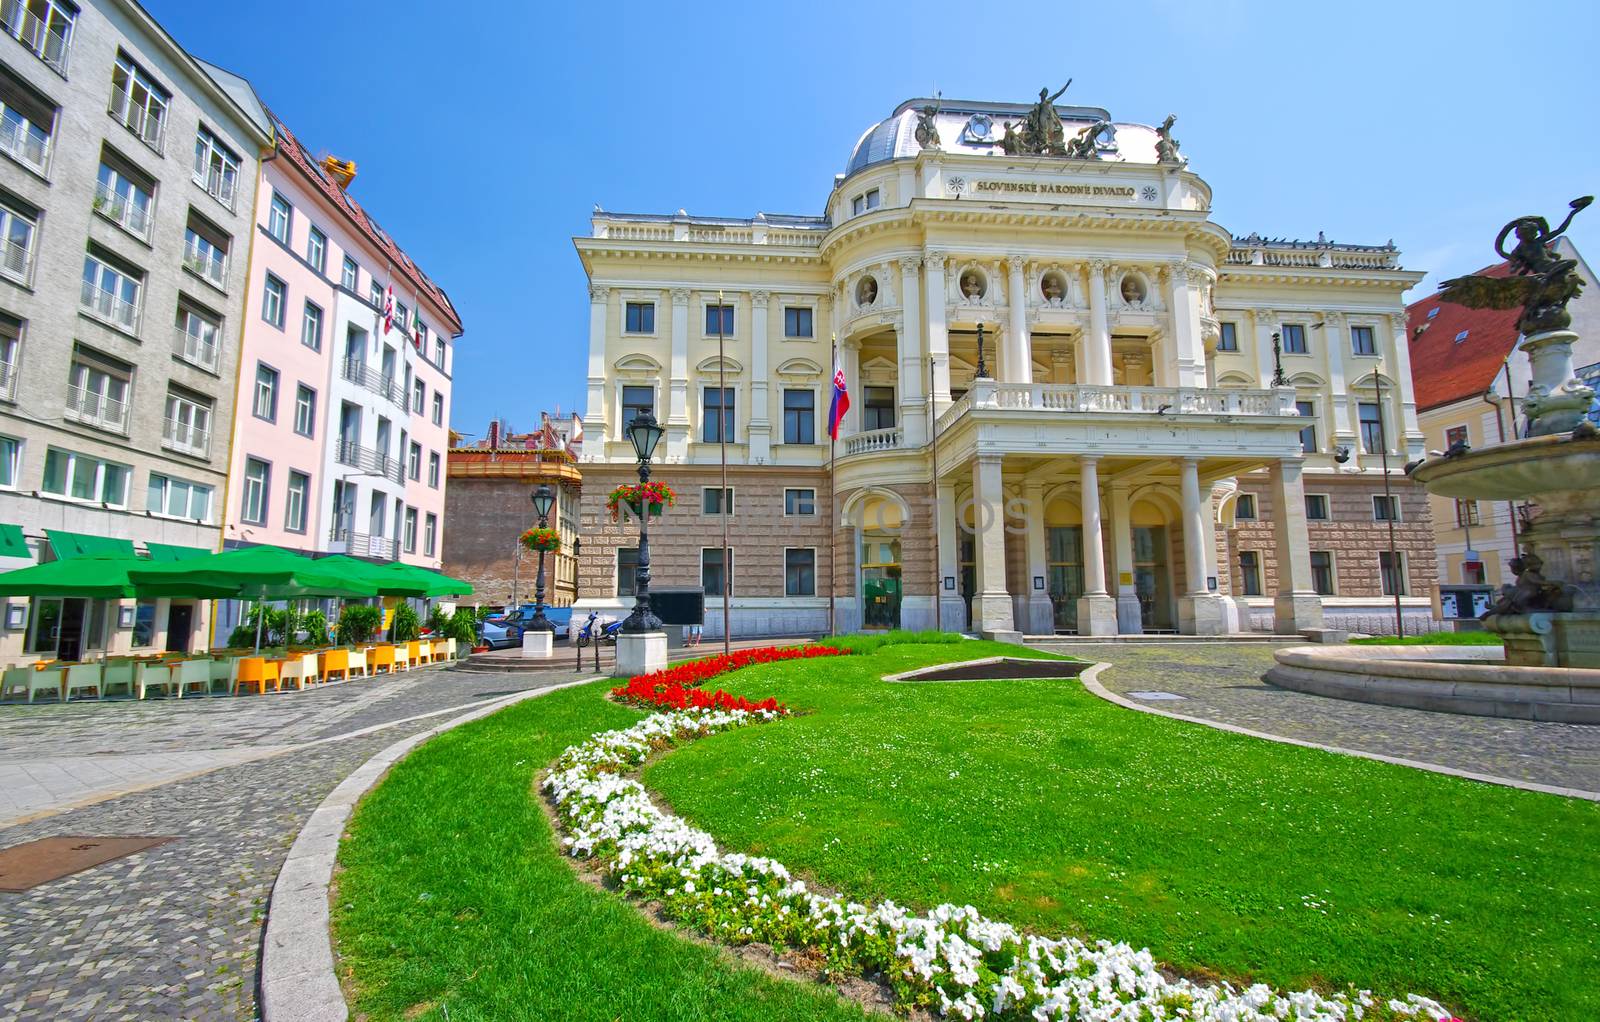 One of the important landmark in Bratislava, National Theatre building in a summer scene